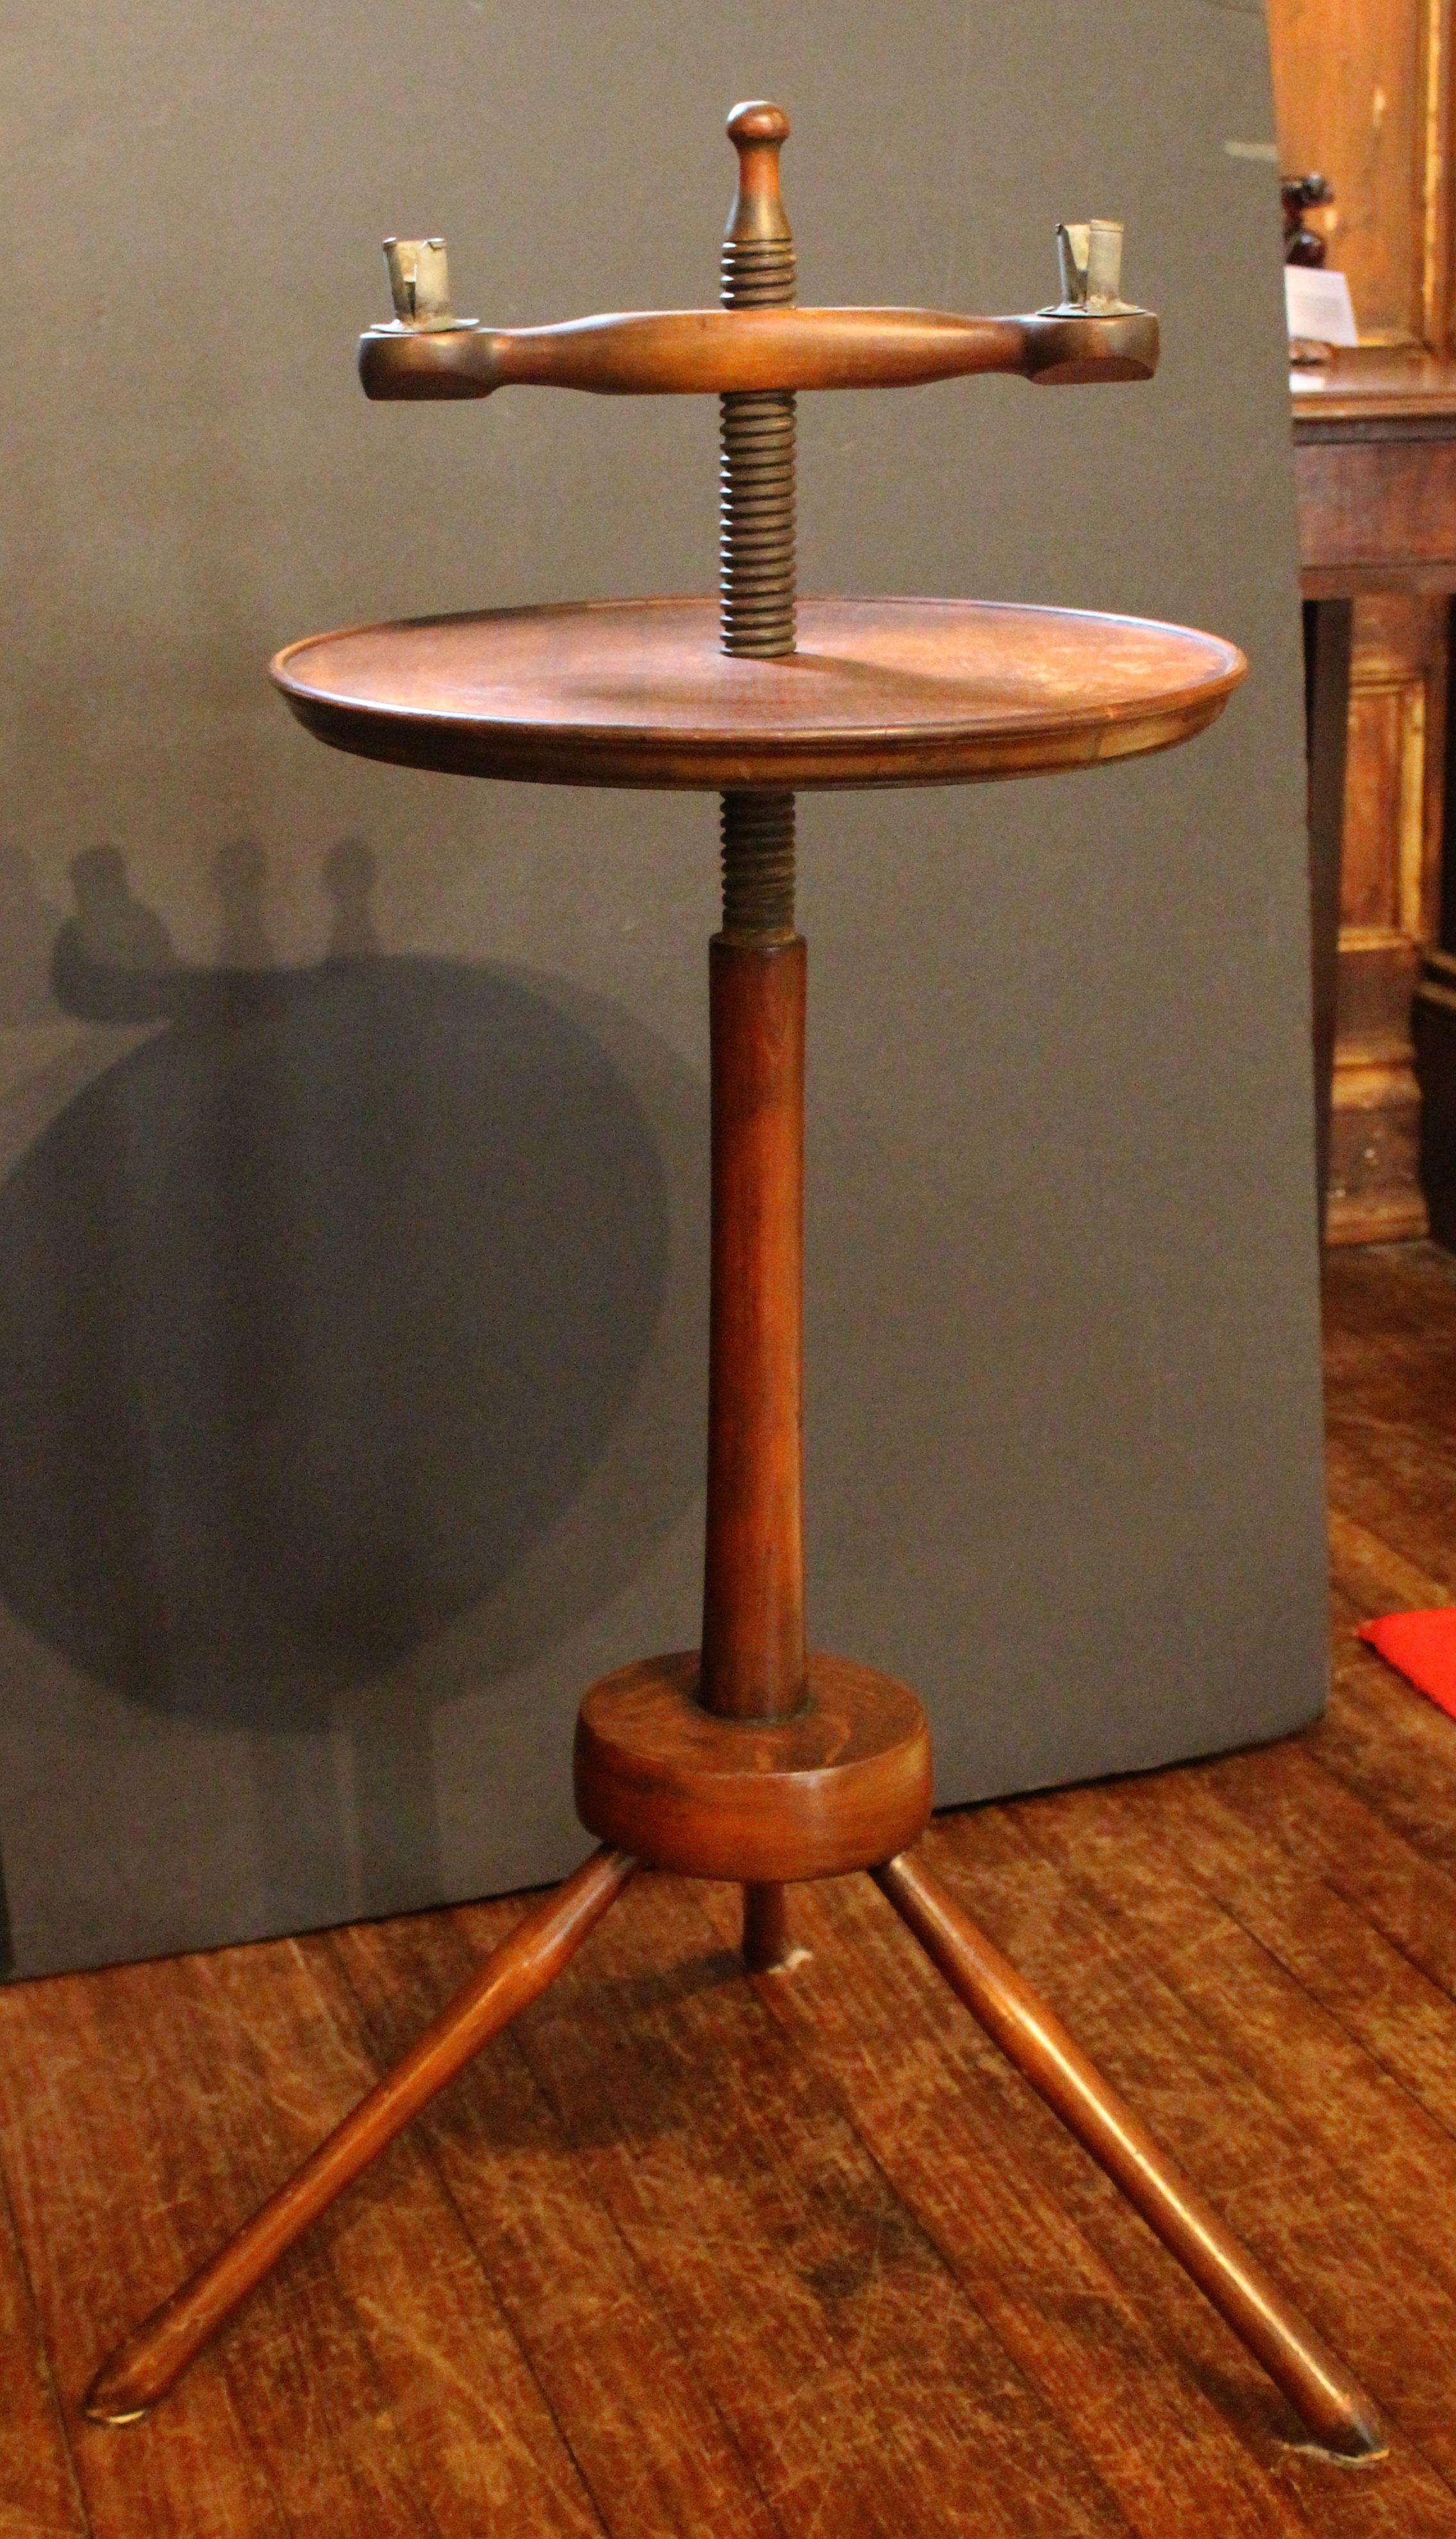 Circa 1830s English Windsor screw-top double light candlestand. Both candle arm & dished top are adjustable. Mix of beech, hickory & oak. Red paint under base disc, green inside arm turnings. Typical Windsor turnings. Heavily refinished in the later